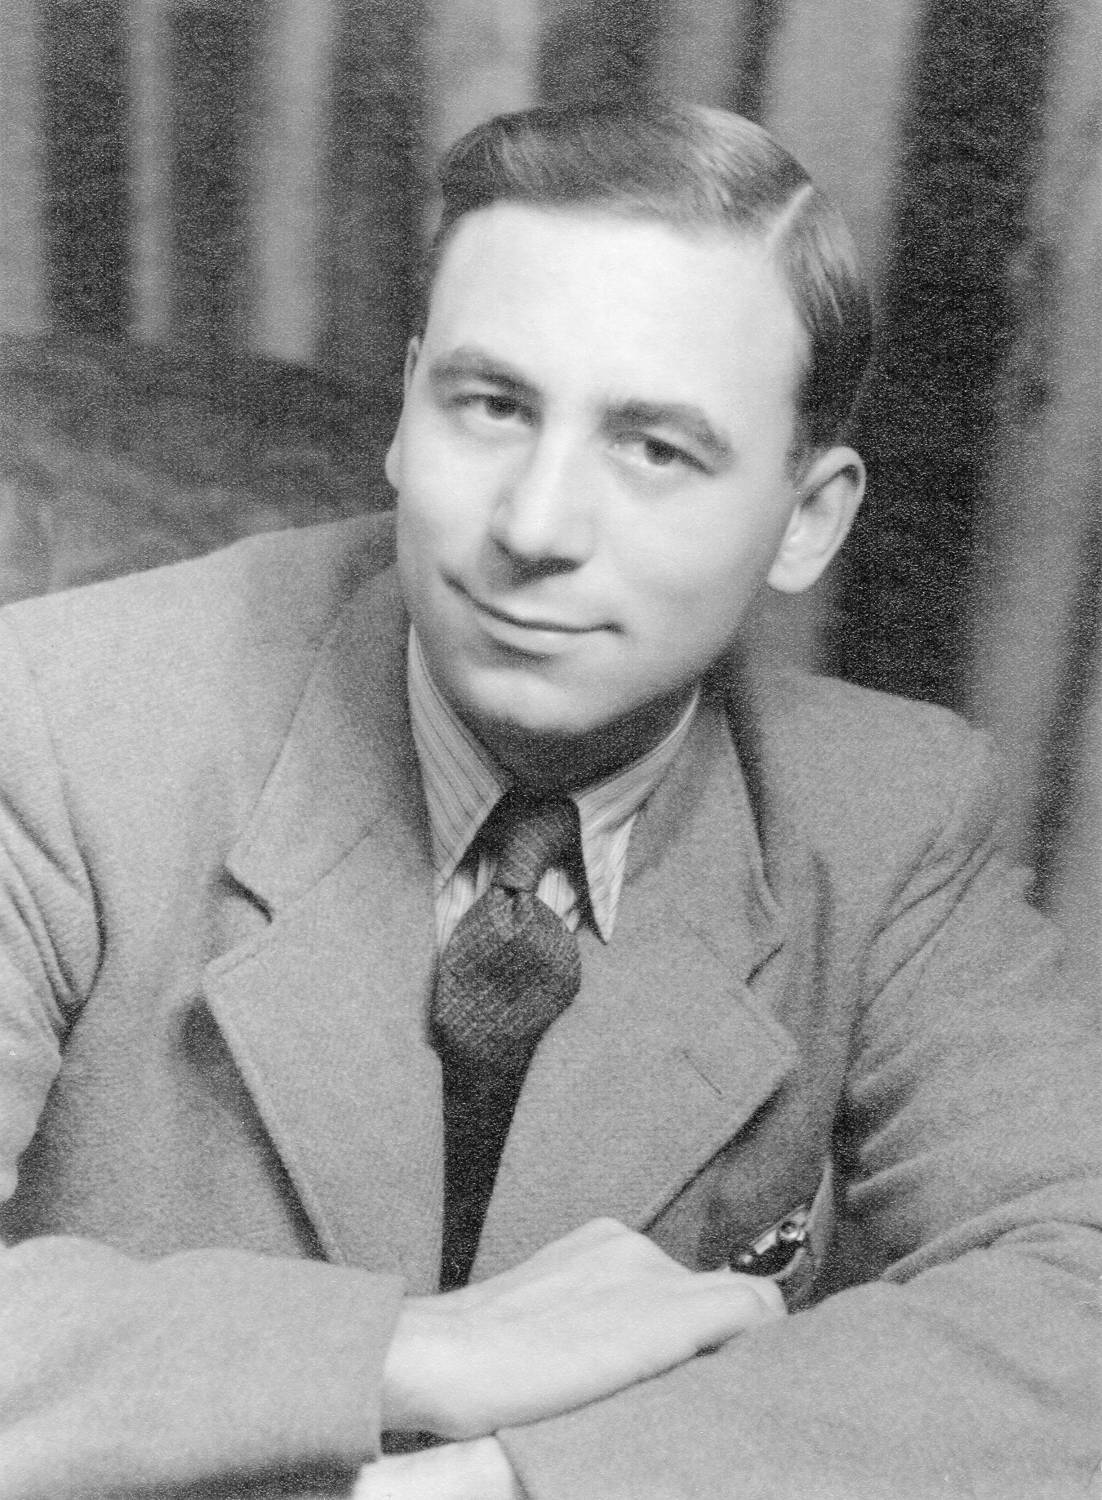 Peter Tranchell in the late 1940s